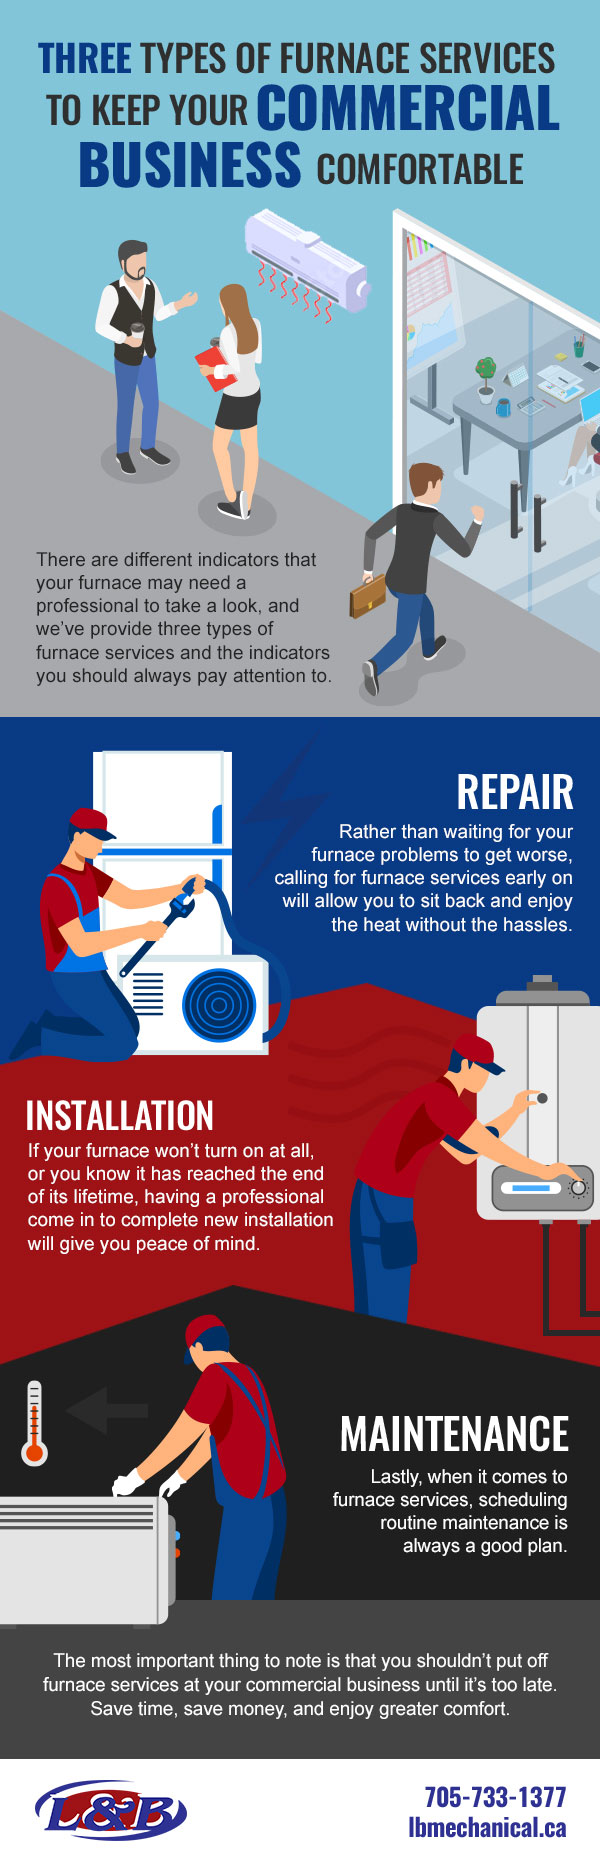 Three Types of Furnace Services to Keep Your Commercial Business Comfortable